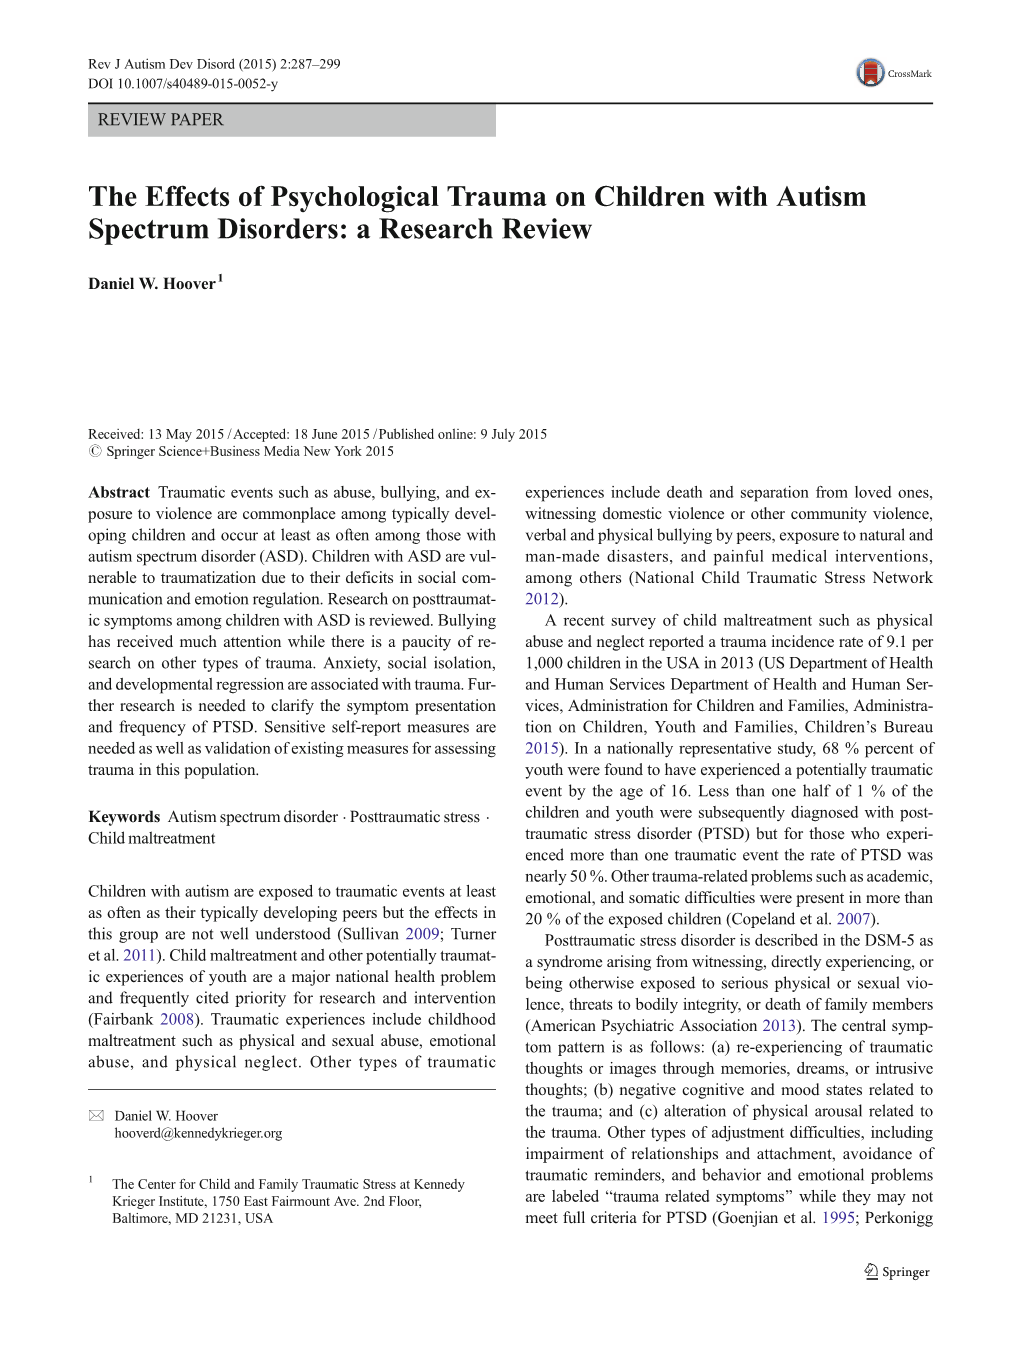 The Effects of Psychological Trauma on Children with Autism Spectrum Disorders: a Research Review